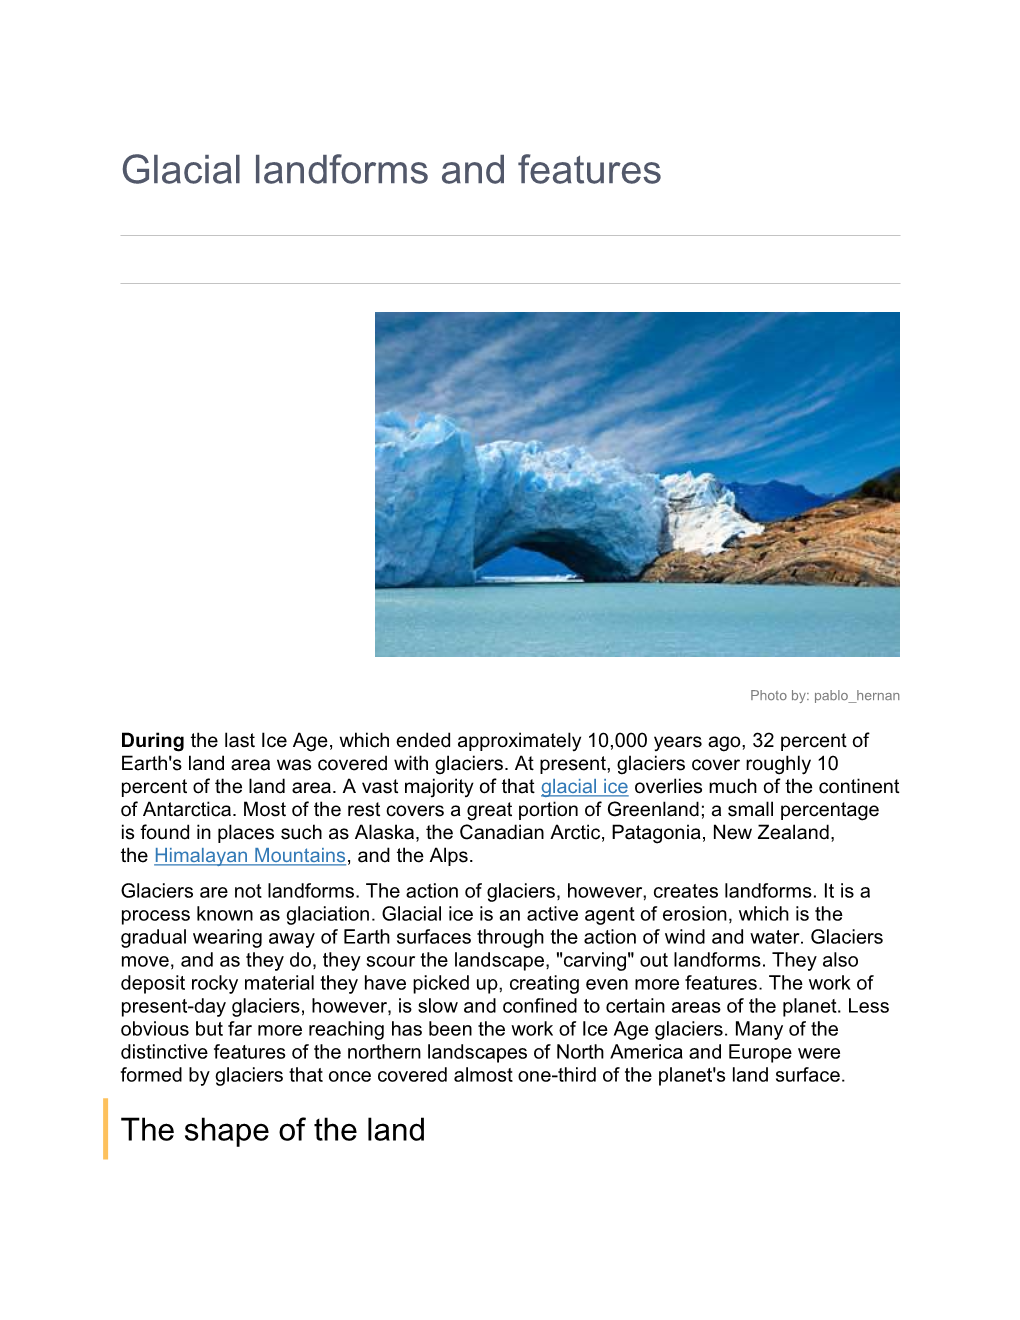 Glacial Landforms and Features